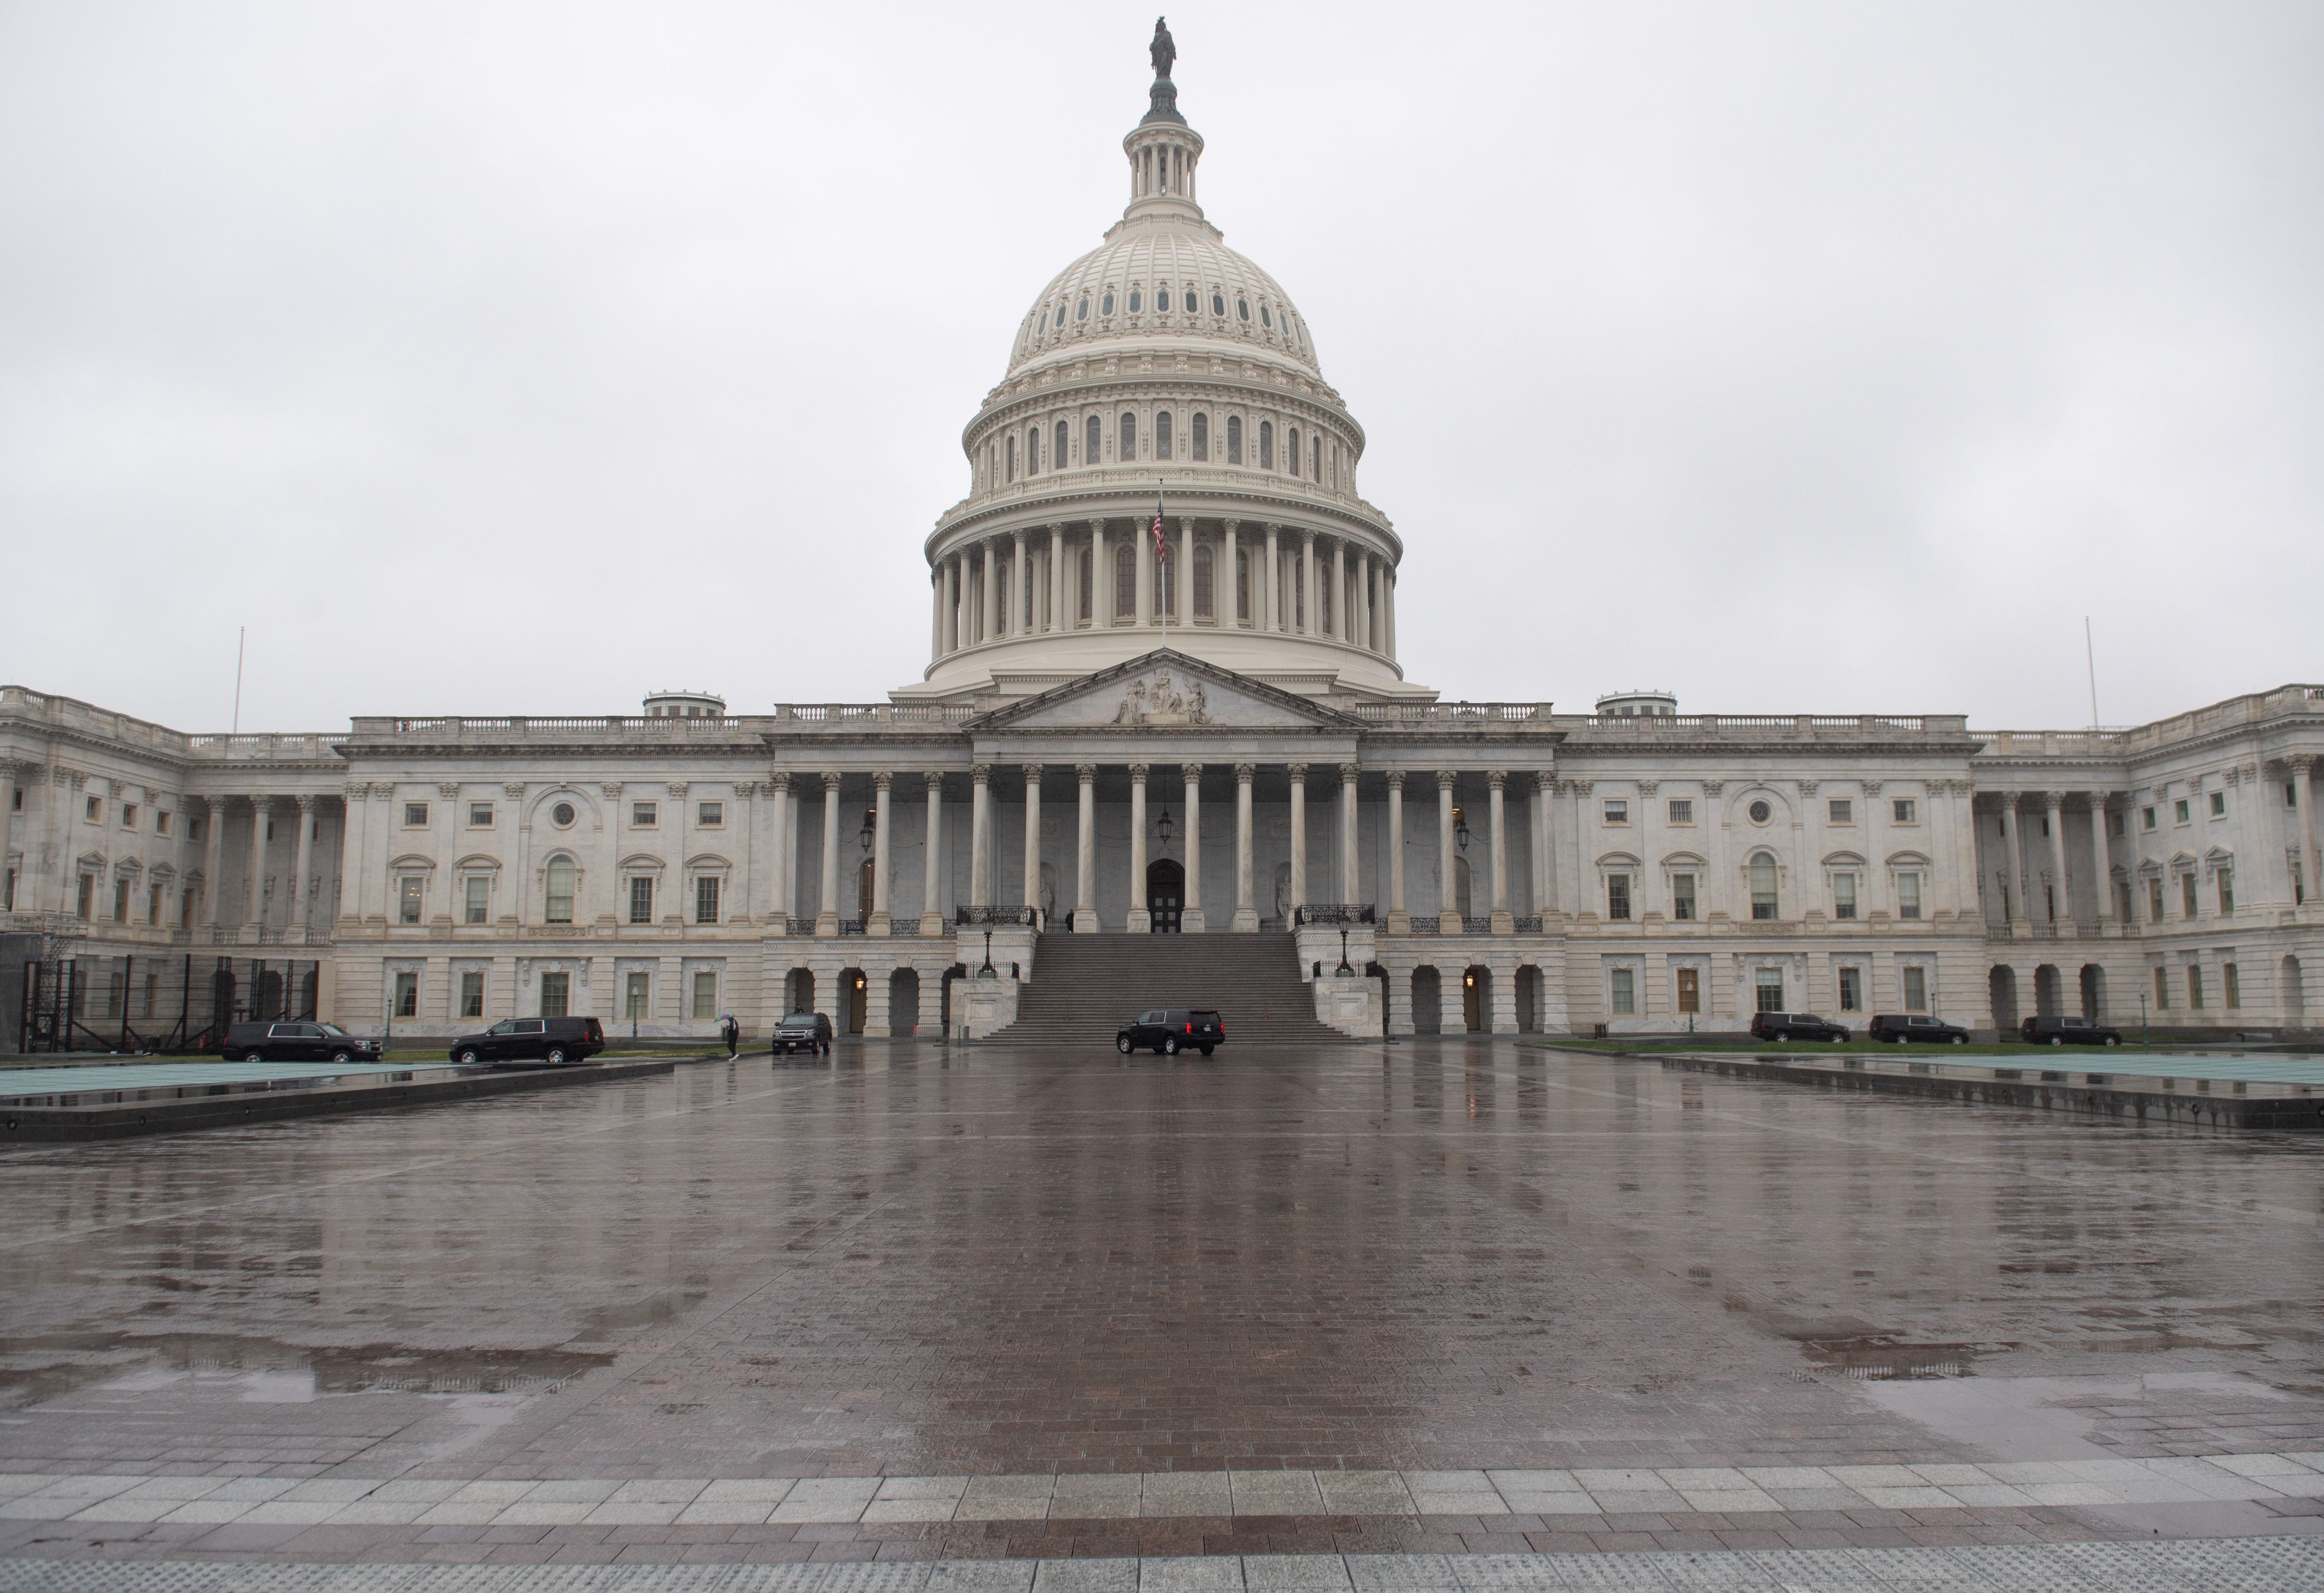 The US Capitol is seen in Washington, DC, March 23, 2020.